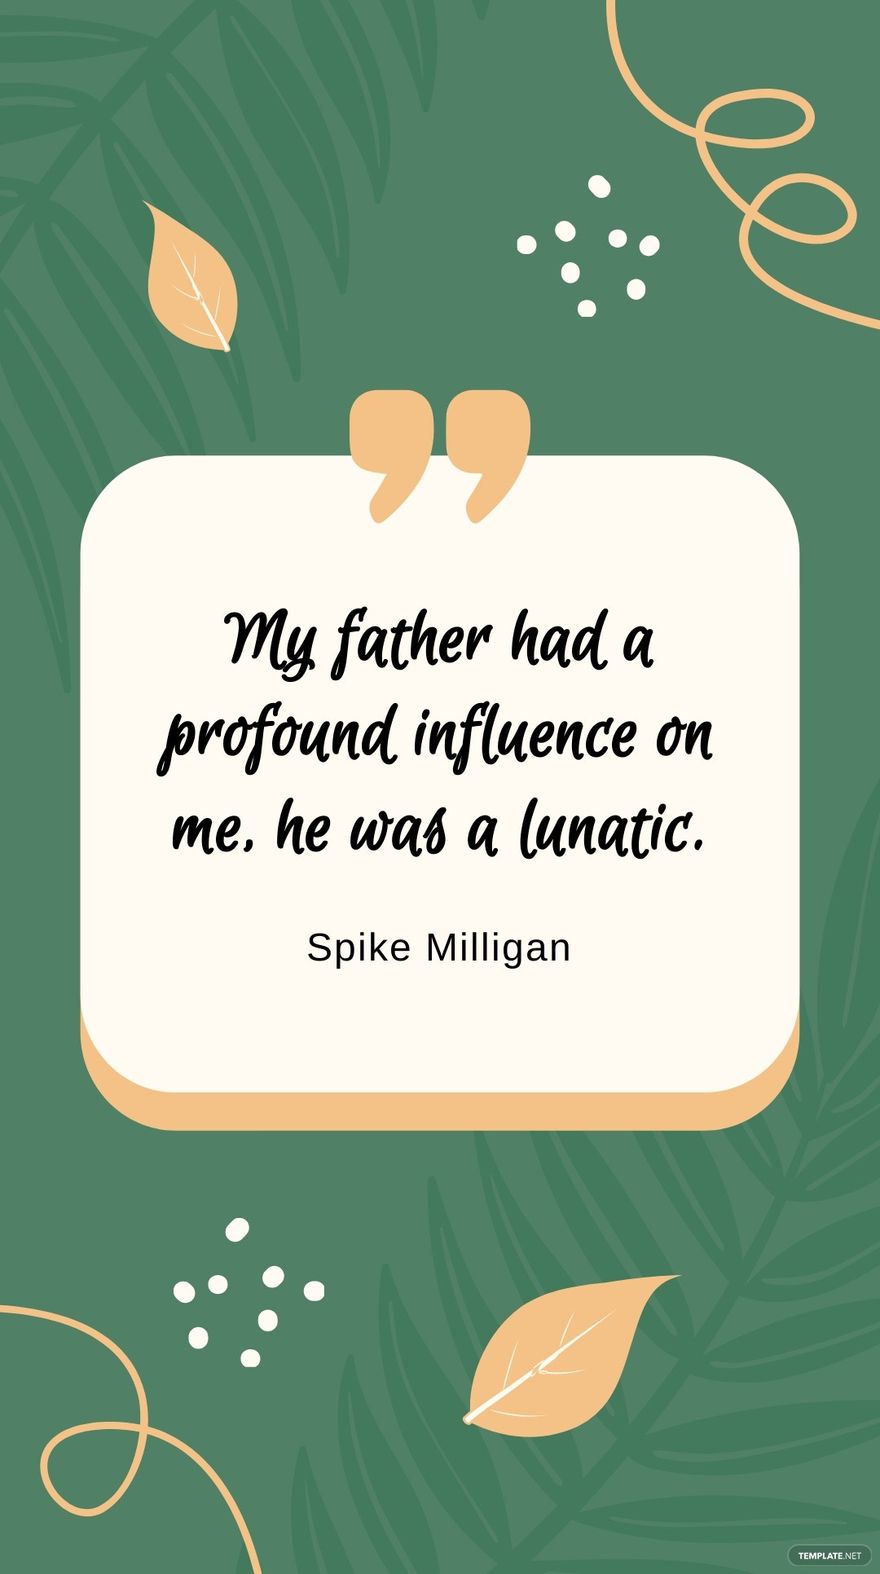 Free Spike Milligan - “My father had a profound influence on me, he was a lunatic.”  in JPG